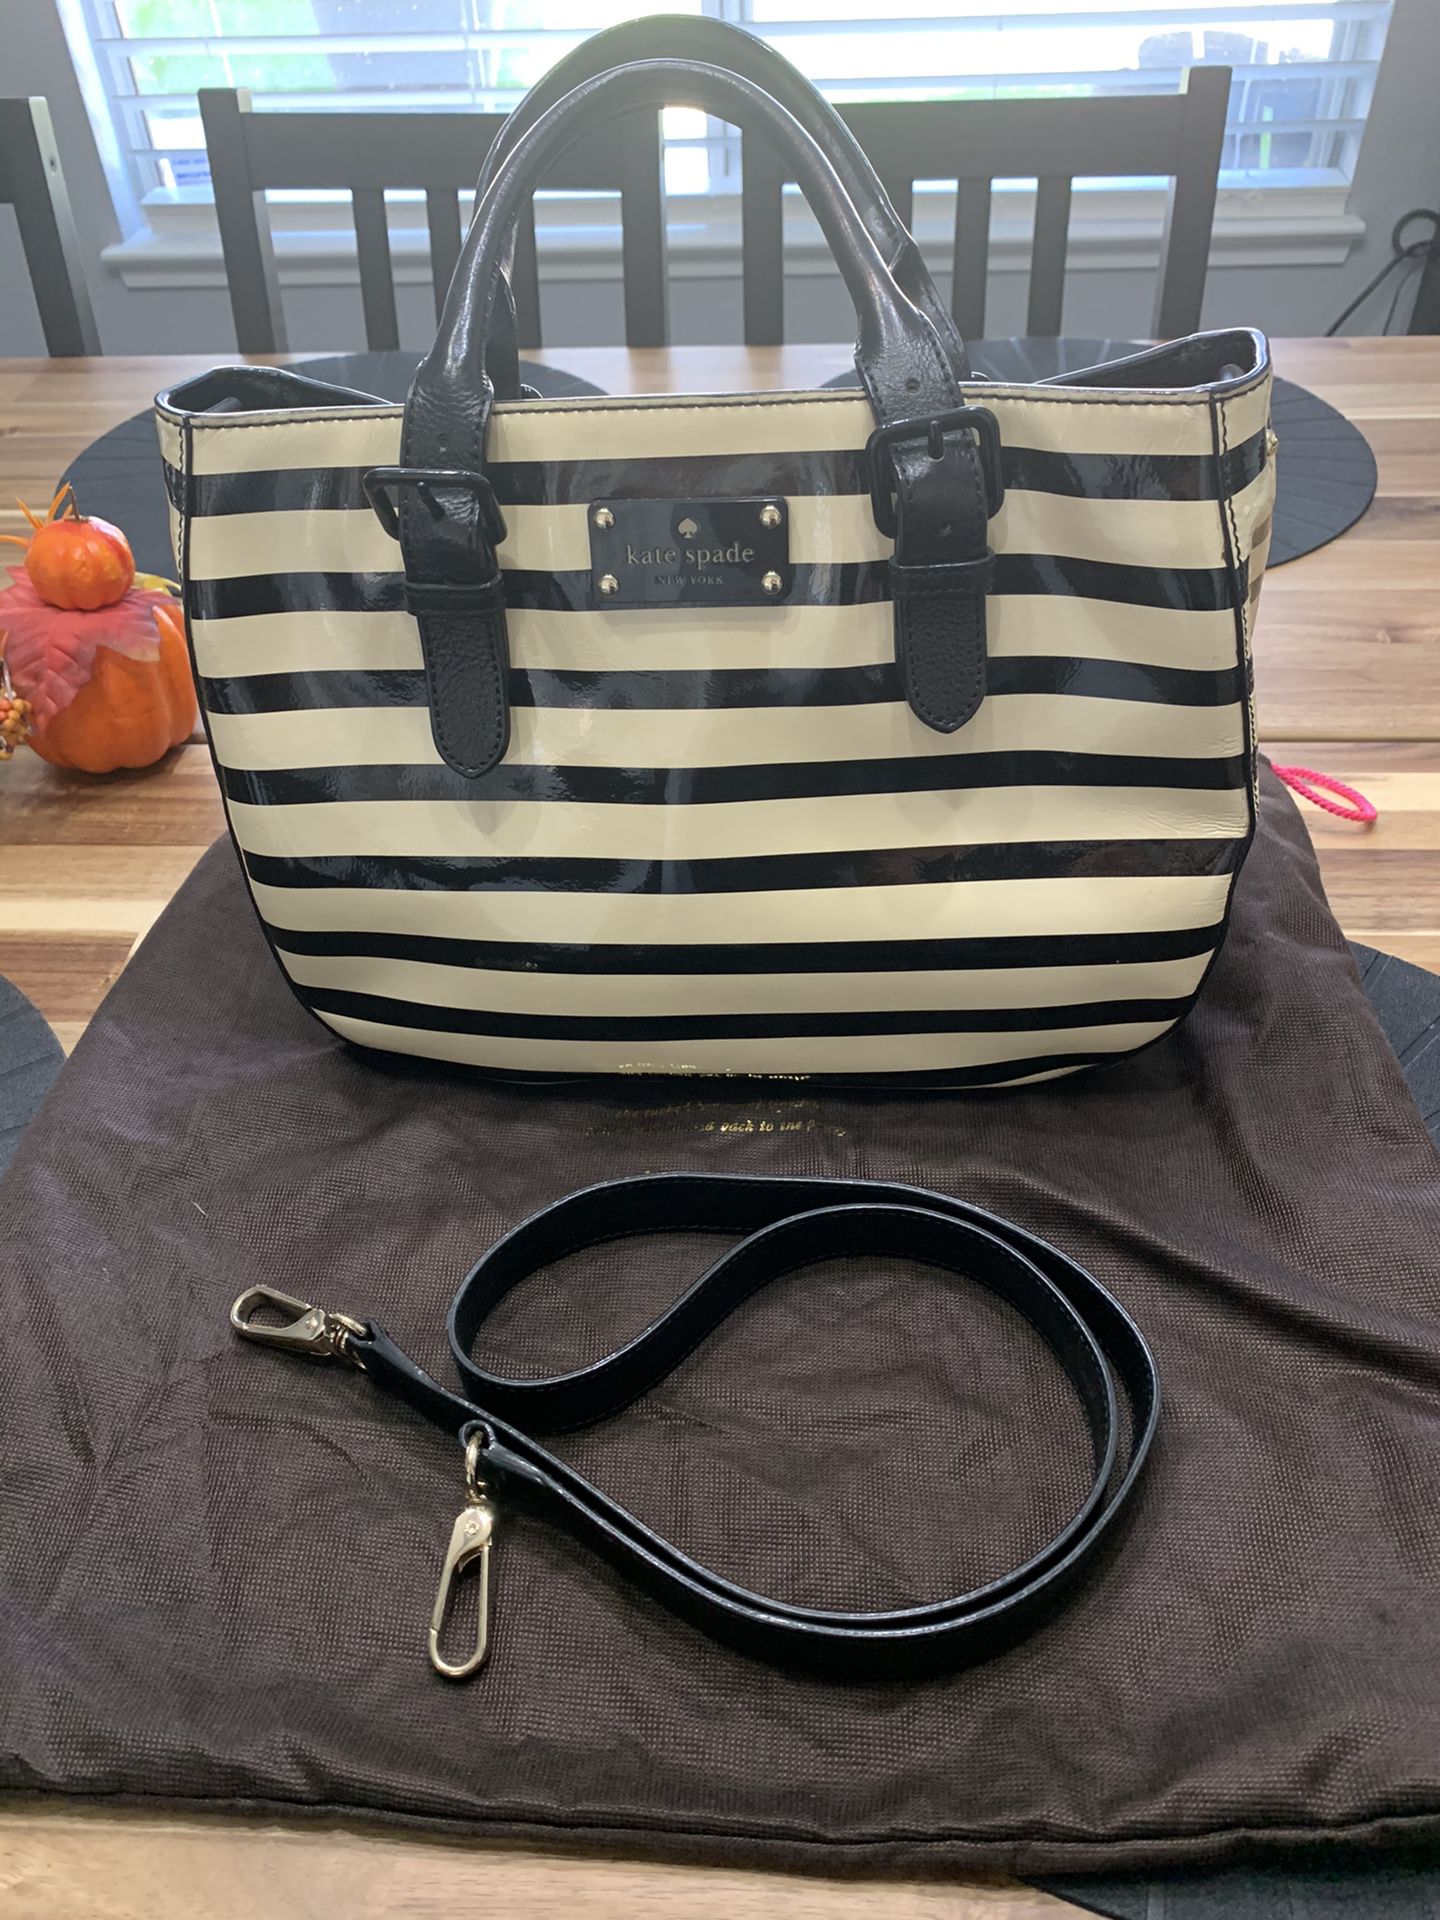 Authentic Kate Spade